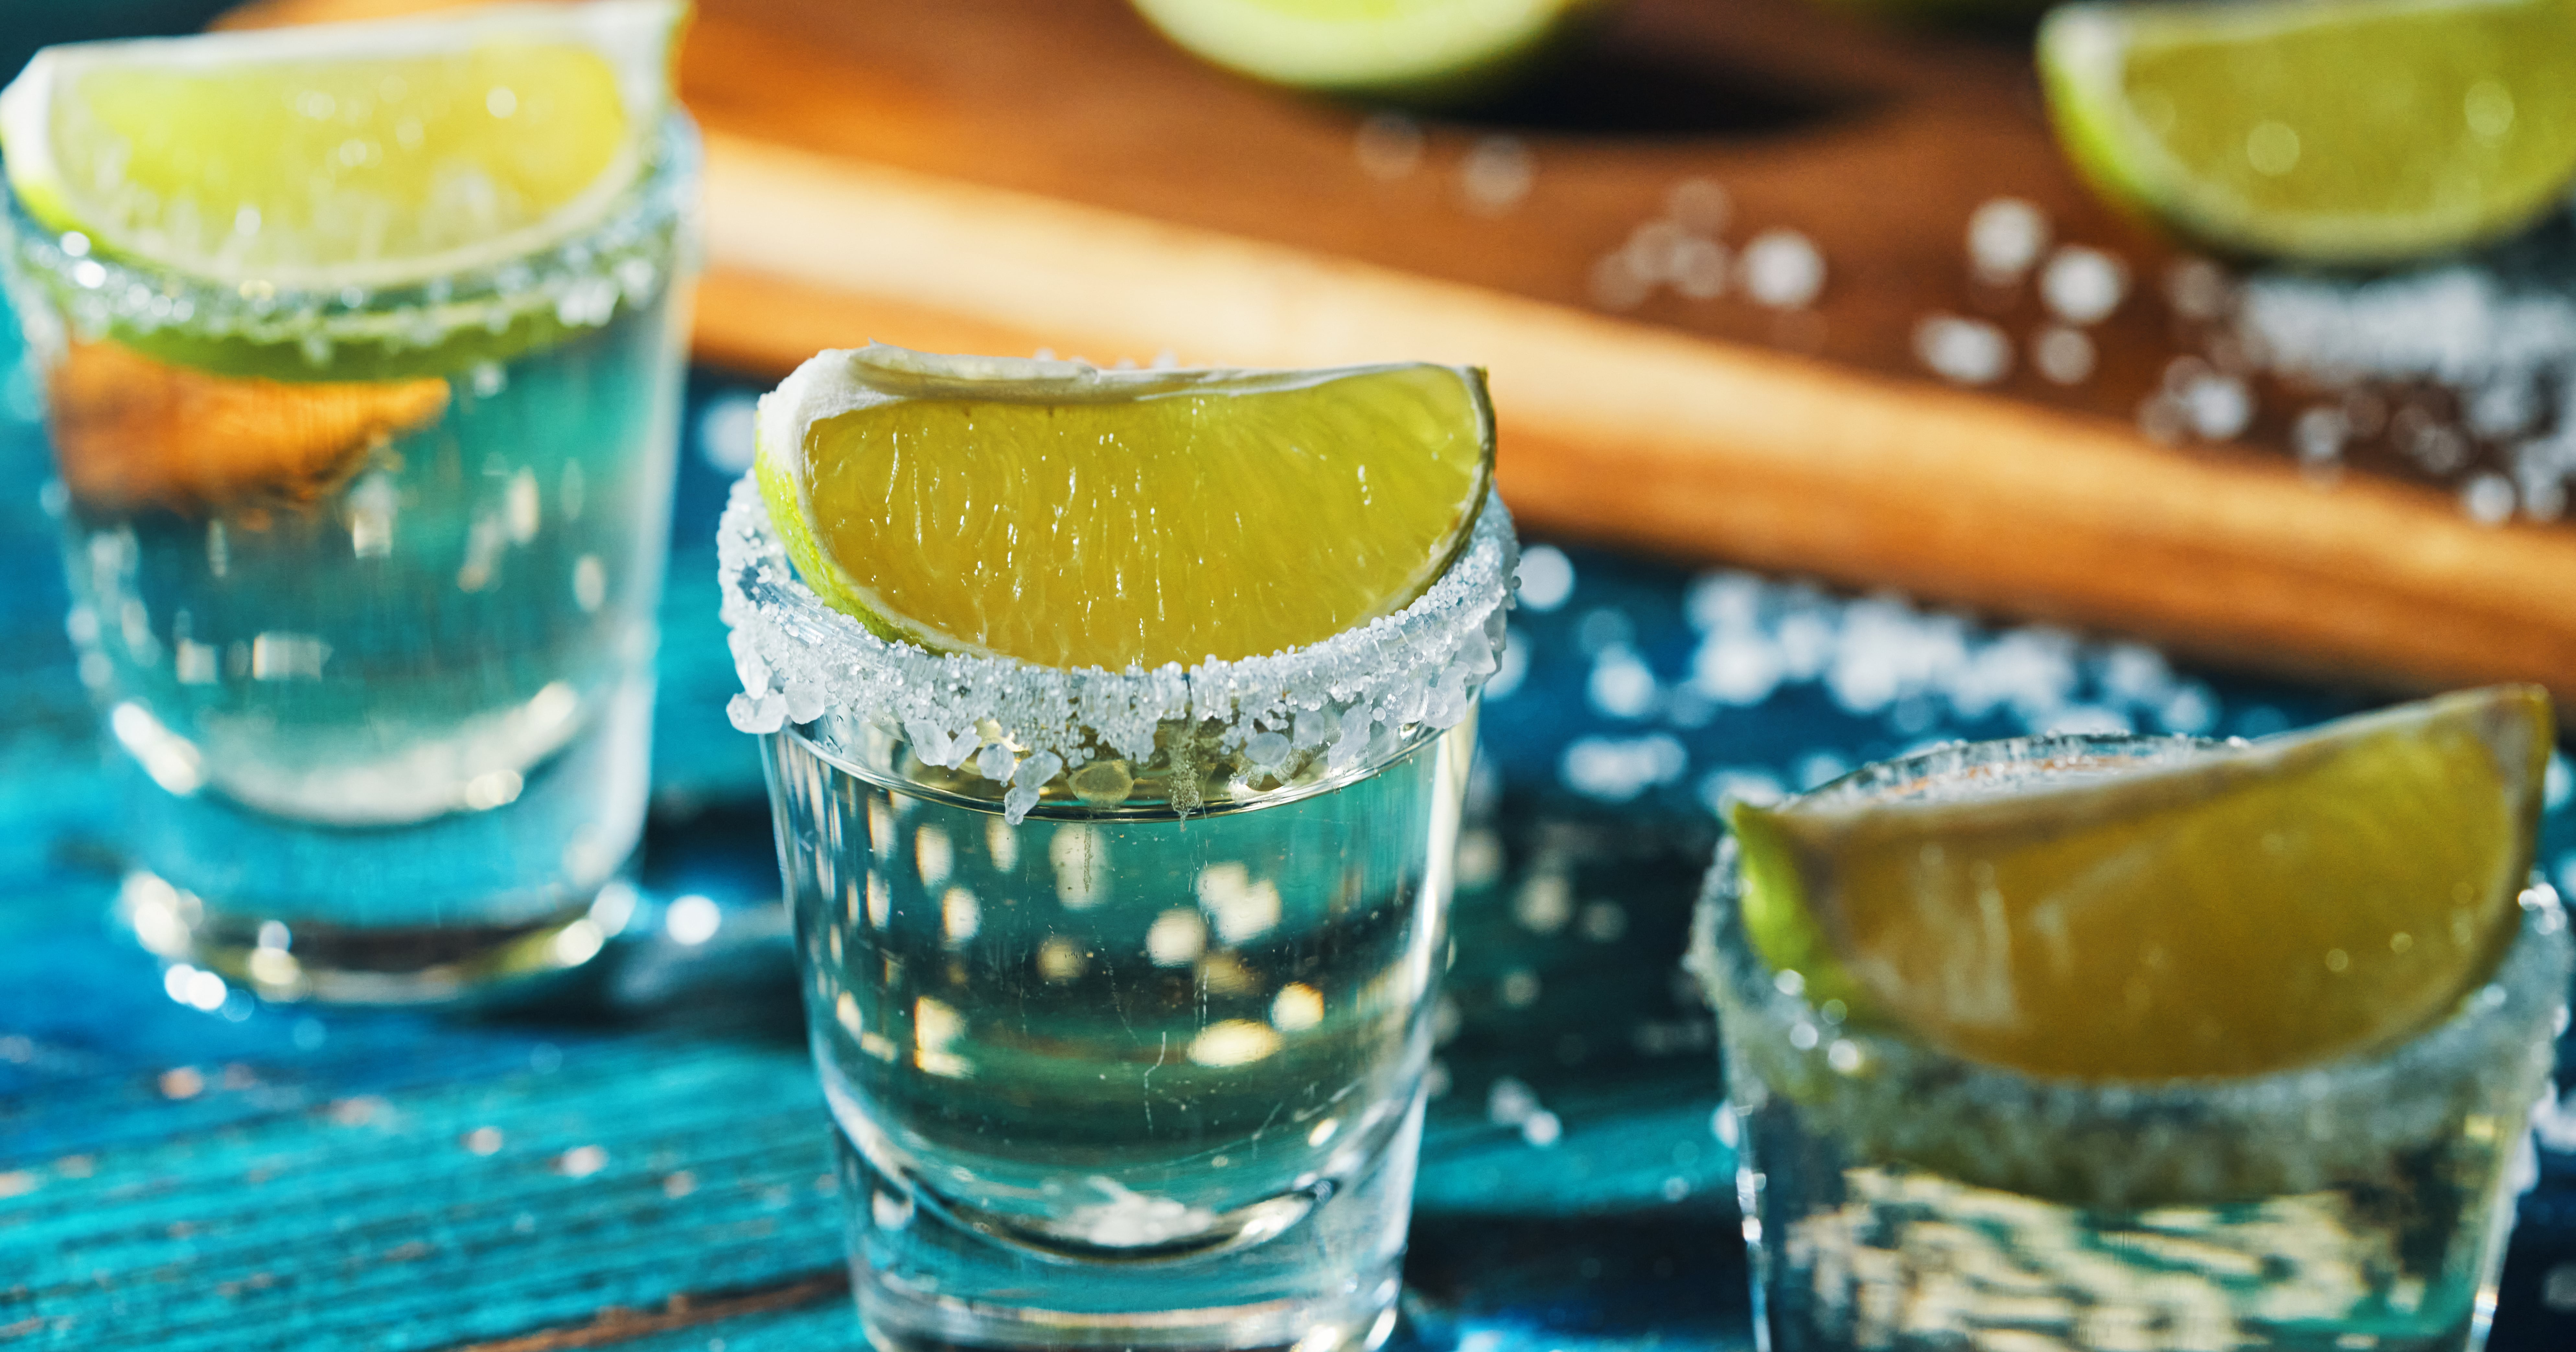 Is Tequila Good For You? Health Benefits Explained